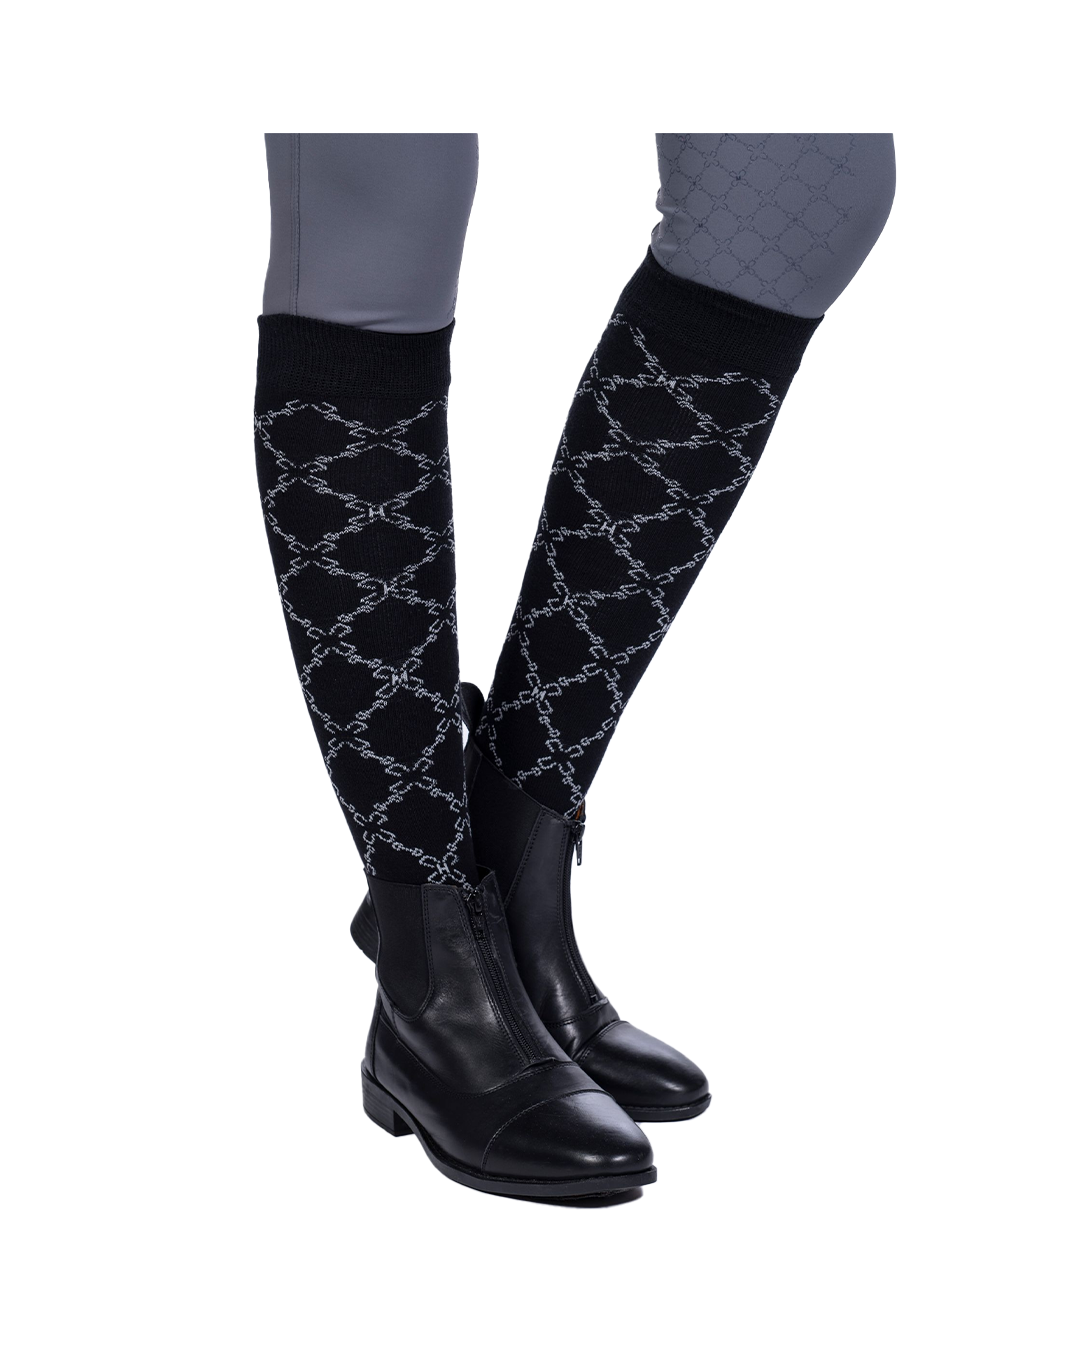 HKM Rosewood Socks  HKM - Equestrian Fashion Outfitters